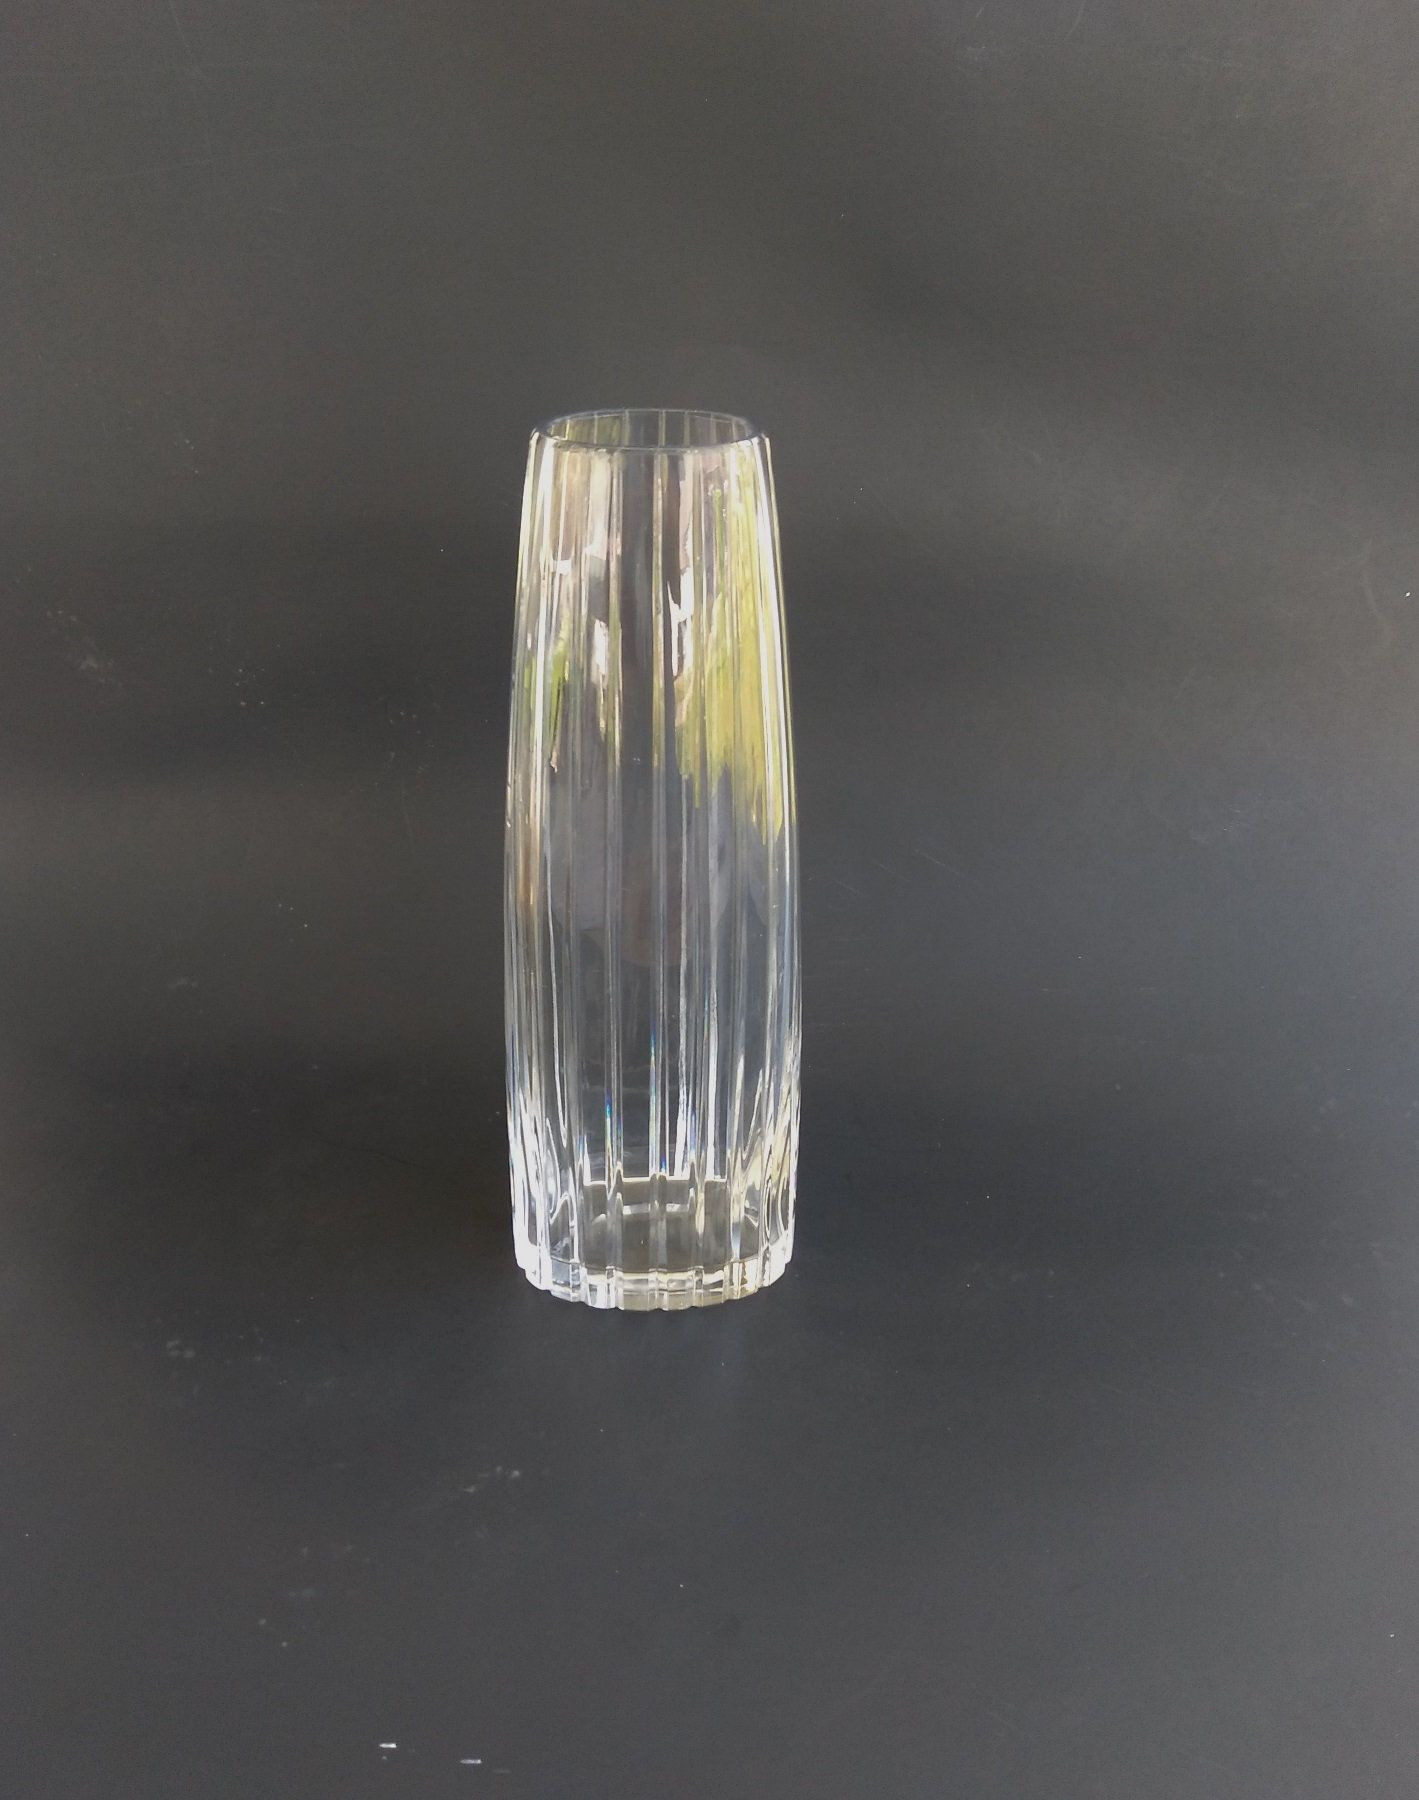 10 Nice atlantis Crystal Vase 2024 free download atlantis crystal vase of excited to share the latest addition to my etsy shop signed with regard to excited to share the latest addition to my etsy shop signed atlantis fantasy cut